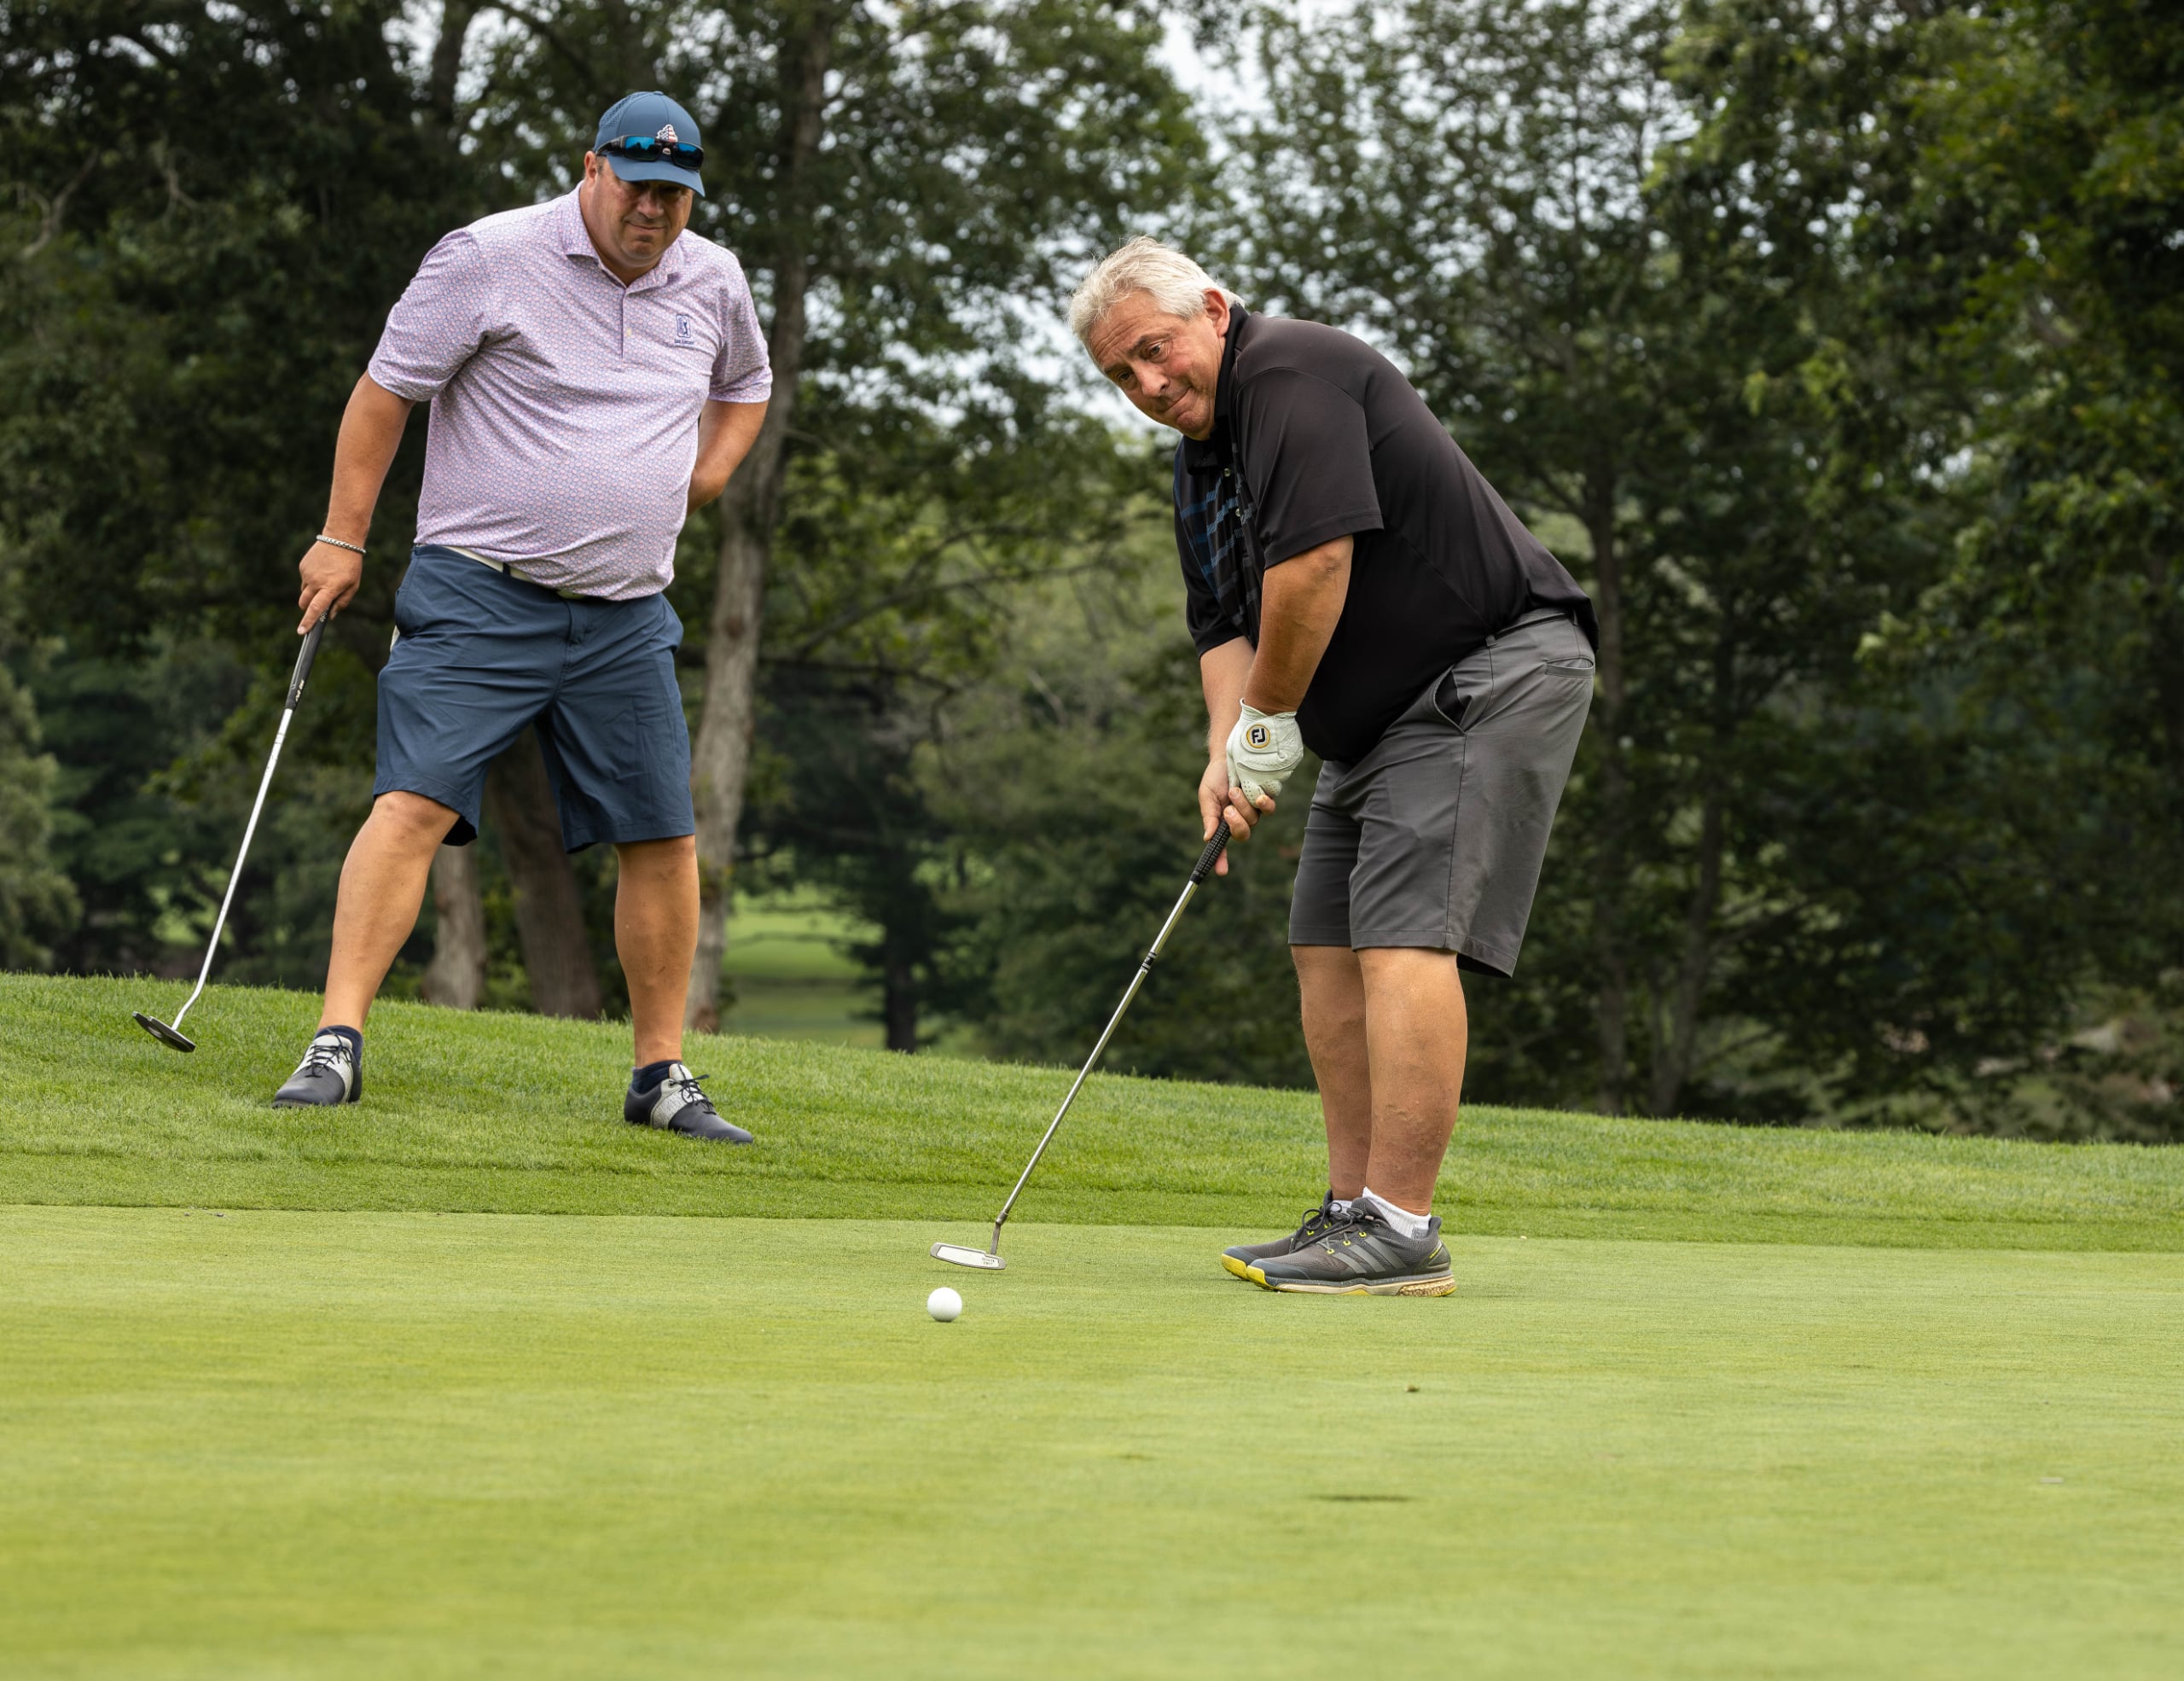 Country-Club-Of-New-Bedford FB-2023-Mens-FB-Gallery August-2023-Country-Club-Of-New-Bedford-FB-2023-Mens-FB-Gallery August-2023-Mens-FB-Gallery-Thursday-Photos-Image-5